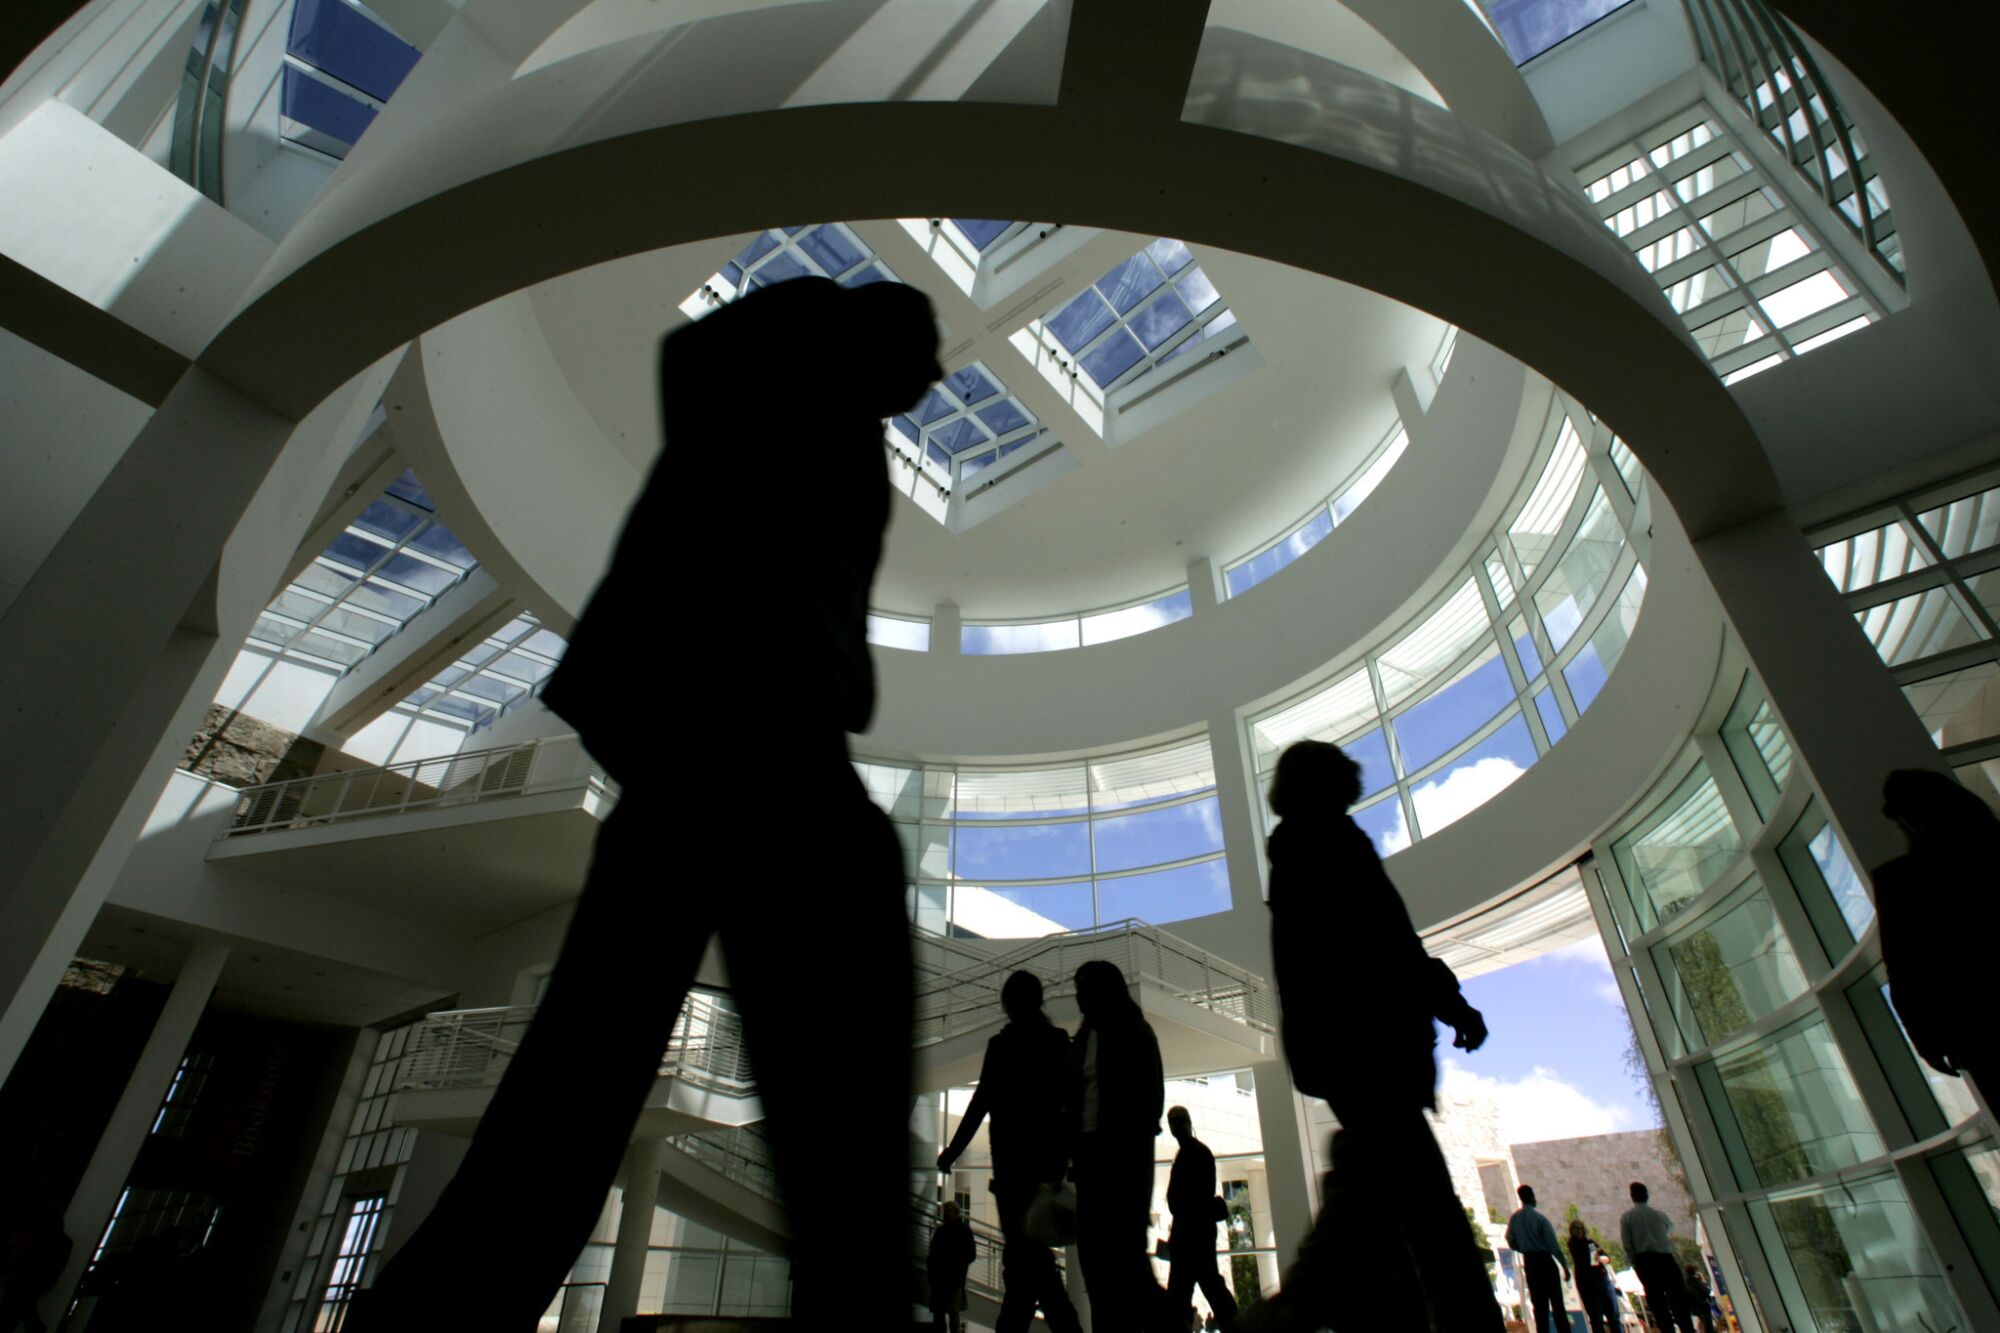 Visitors to the Getty Center walk through the main lobby atrium prior to the pandemic